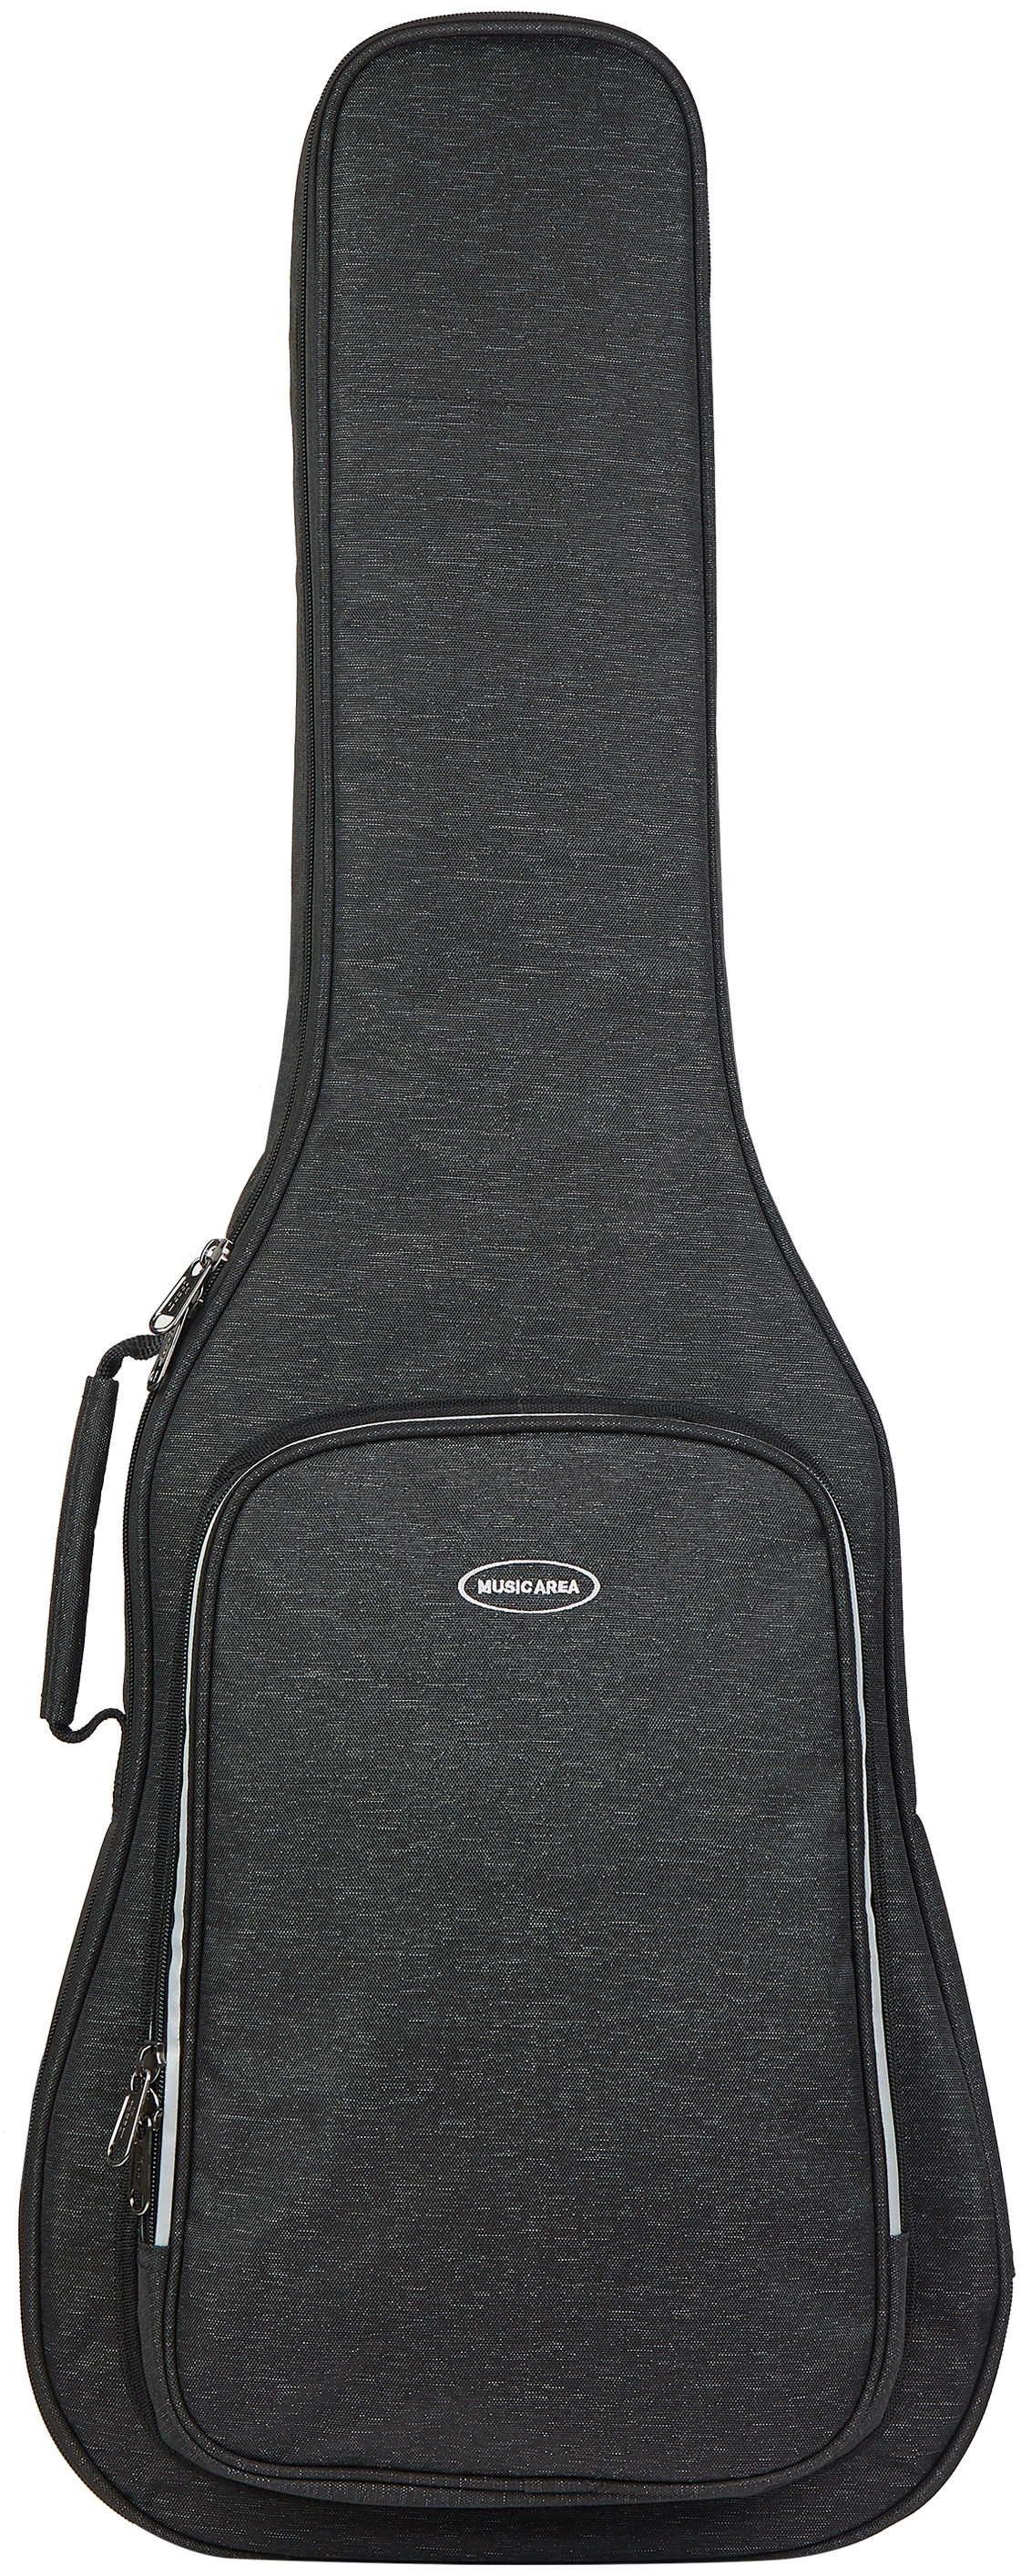 MUSIC AREA RB10 Electric Guitar Case | Obrázok 1 | eplay.sk